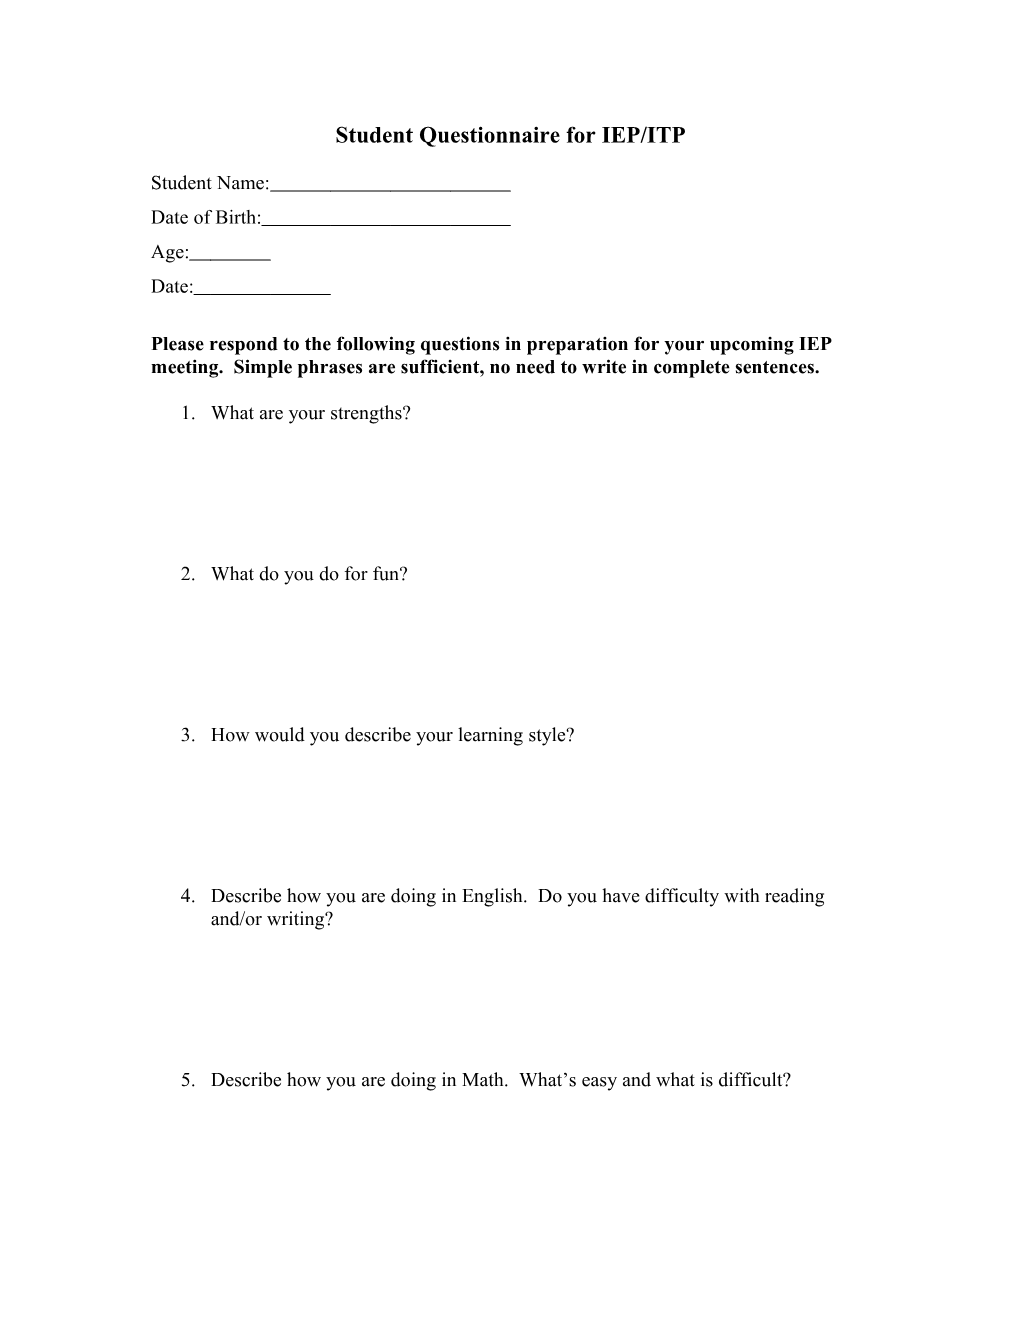 Student Questionaire for IEP/ITP